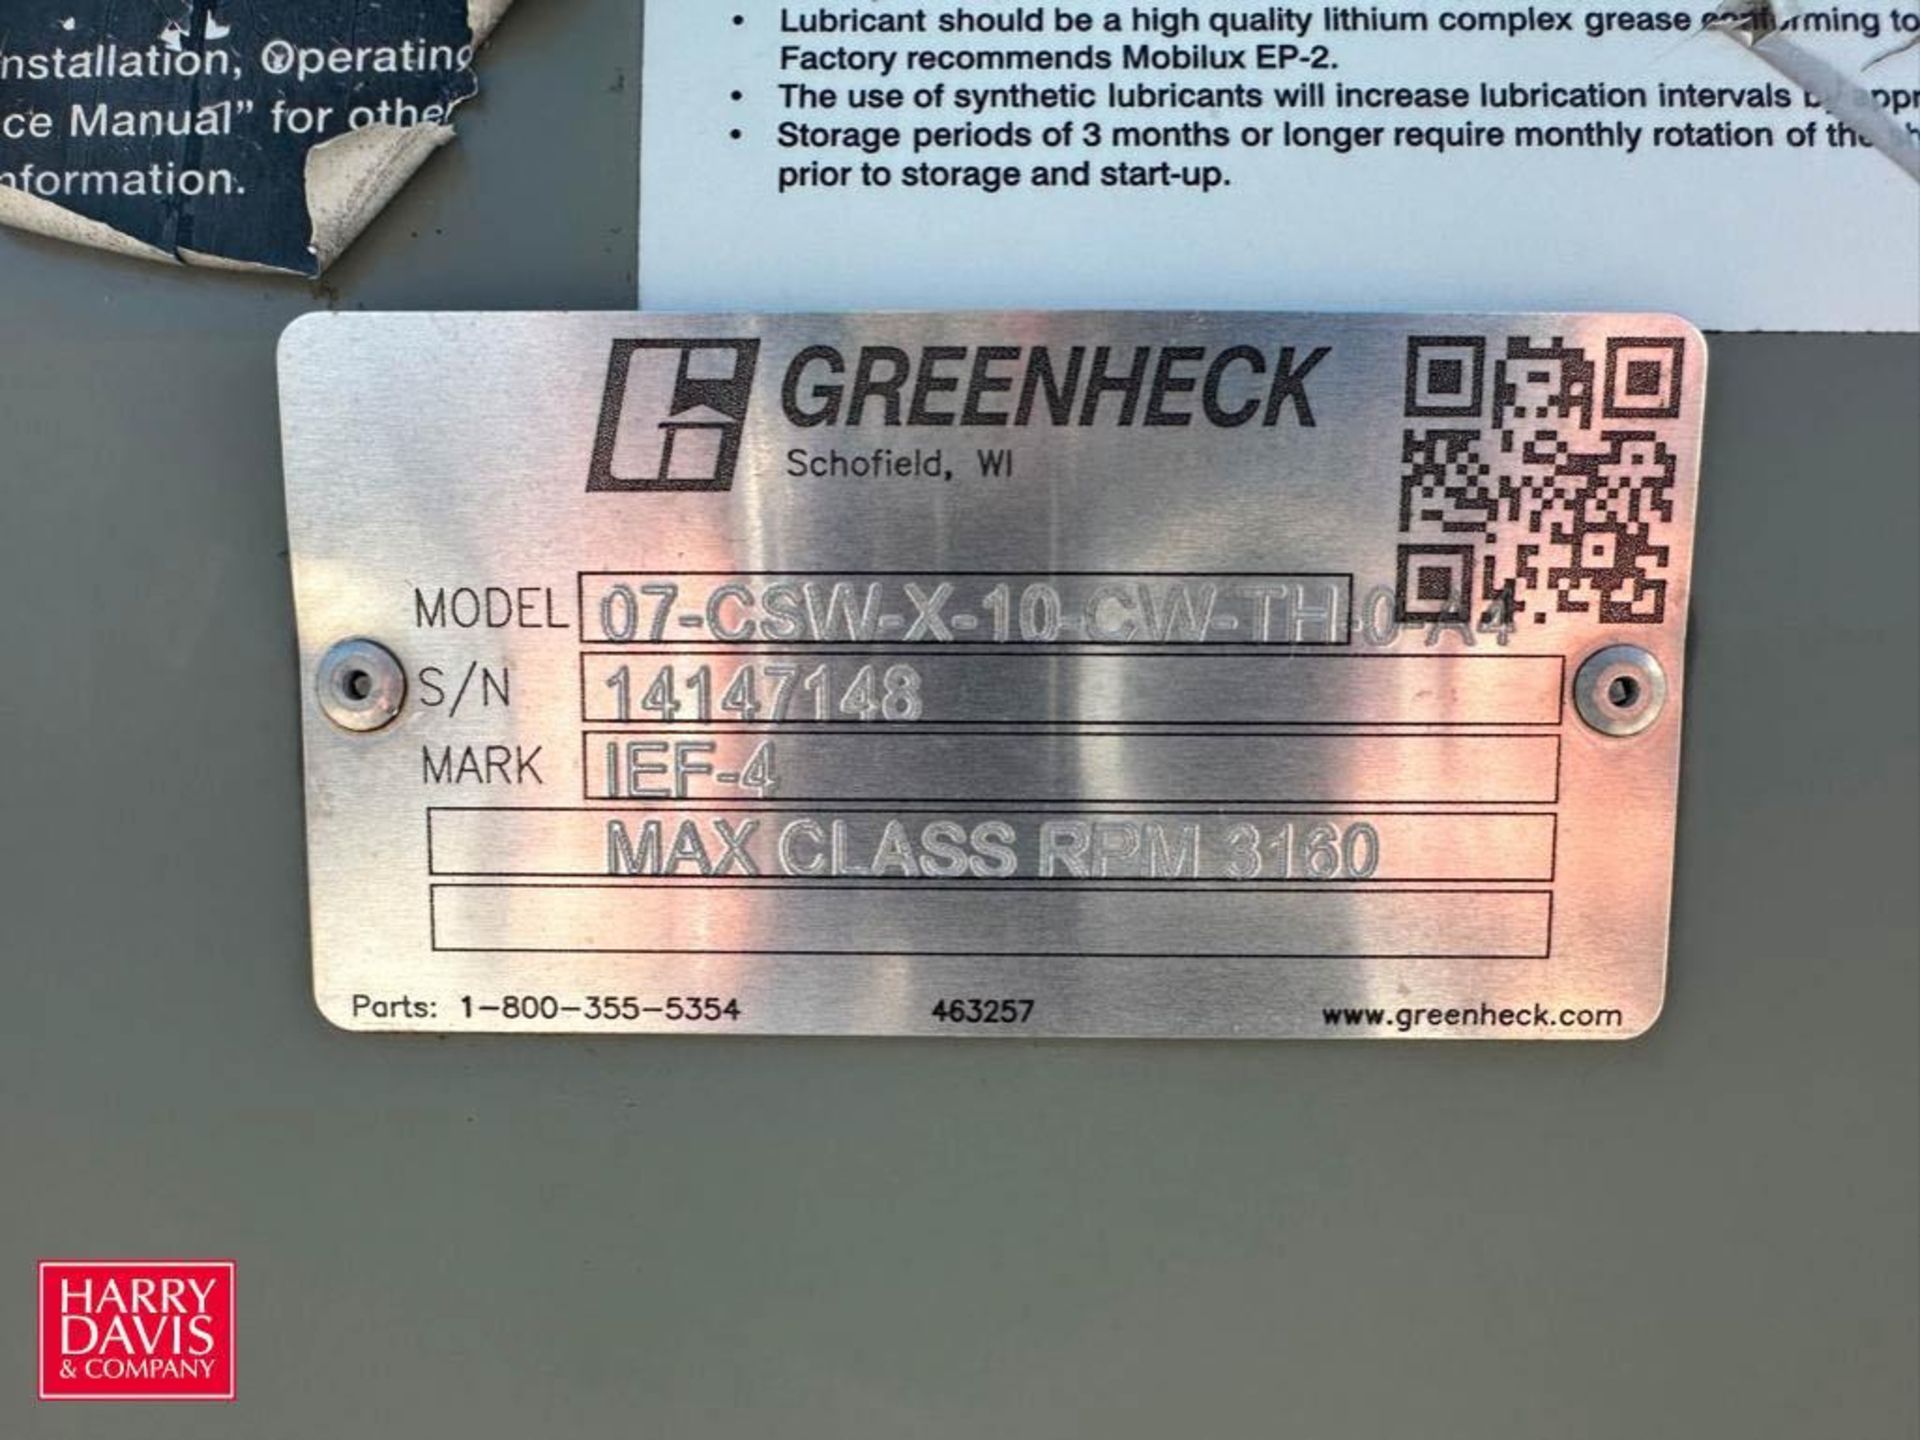 Greenheck Centrifugal Fan, Model: 07-CSW-X-10-CW-TH-0-A4, S/N: 14147148 - Rigging Fee: $2,500 - Image 2 of 2